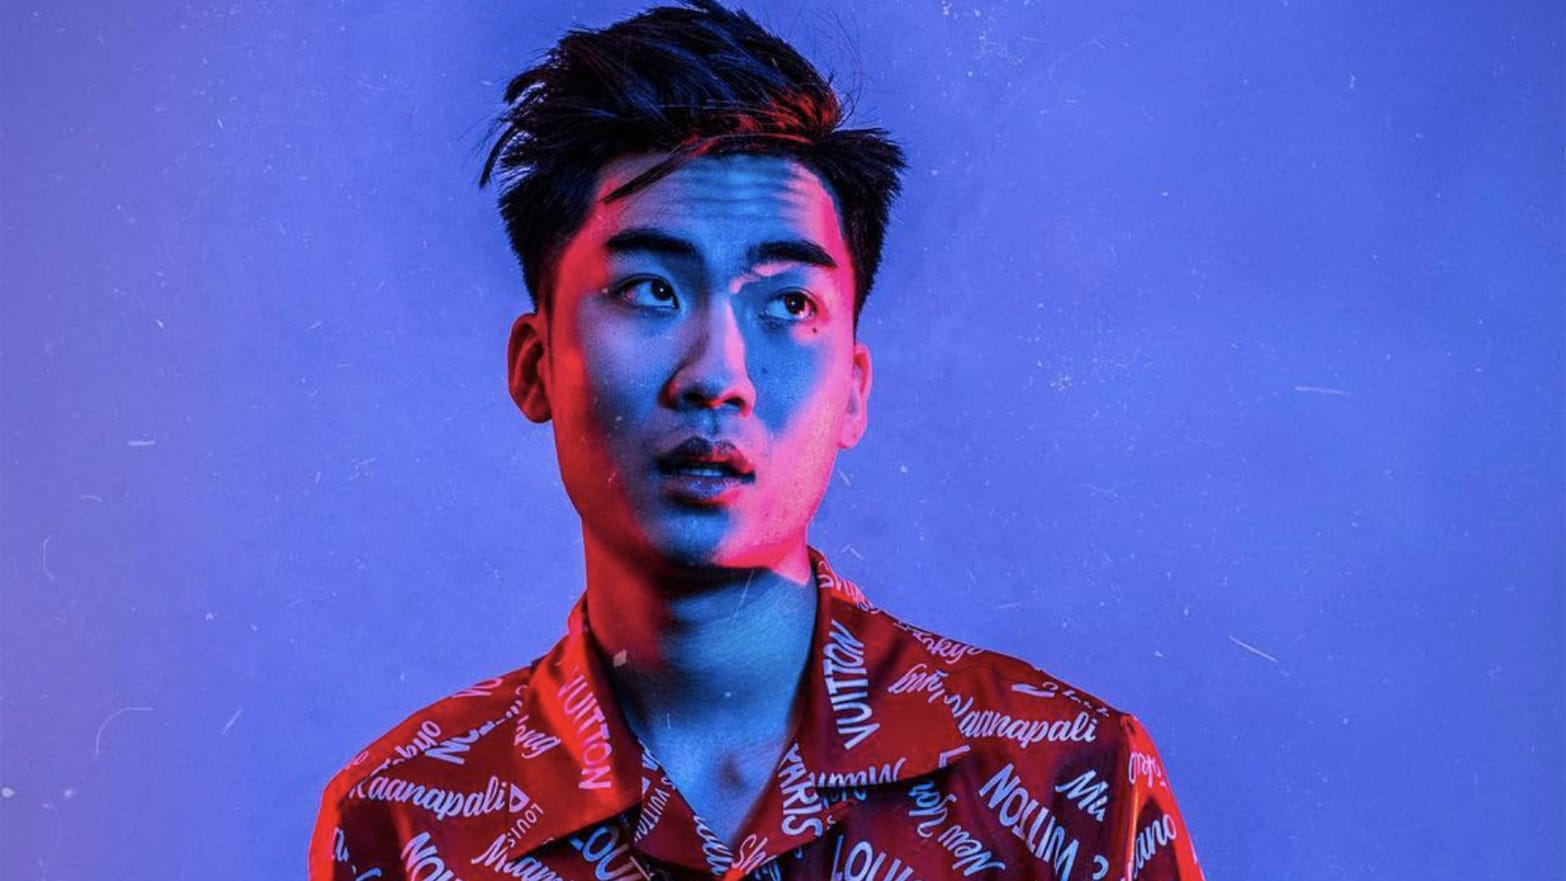 13-astonishing-facts-about-ricegum